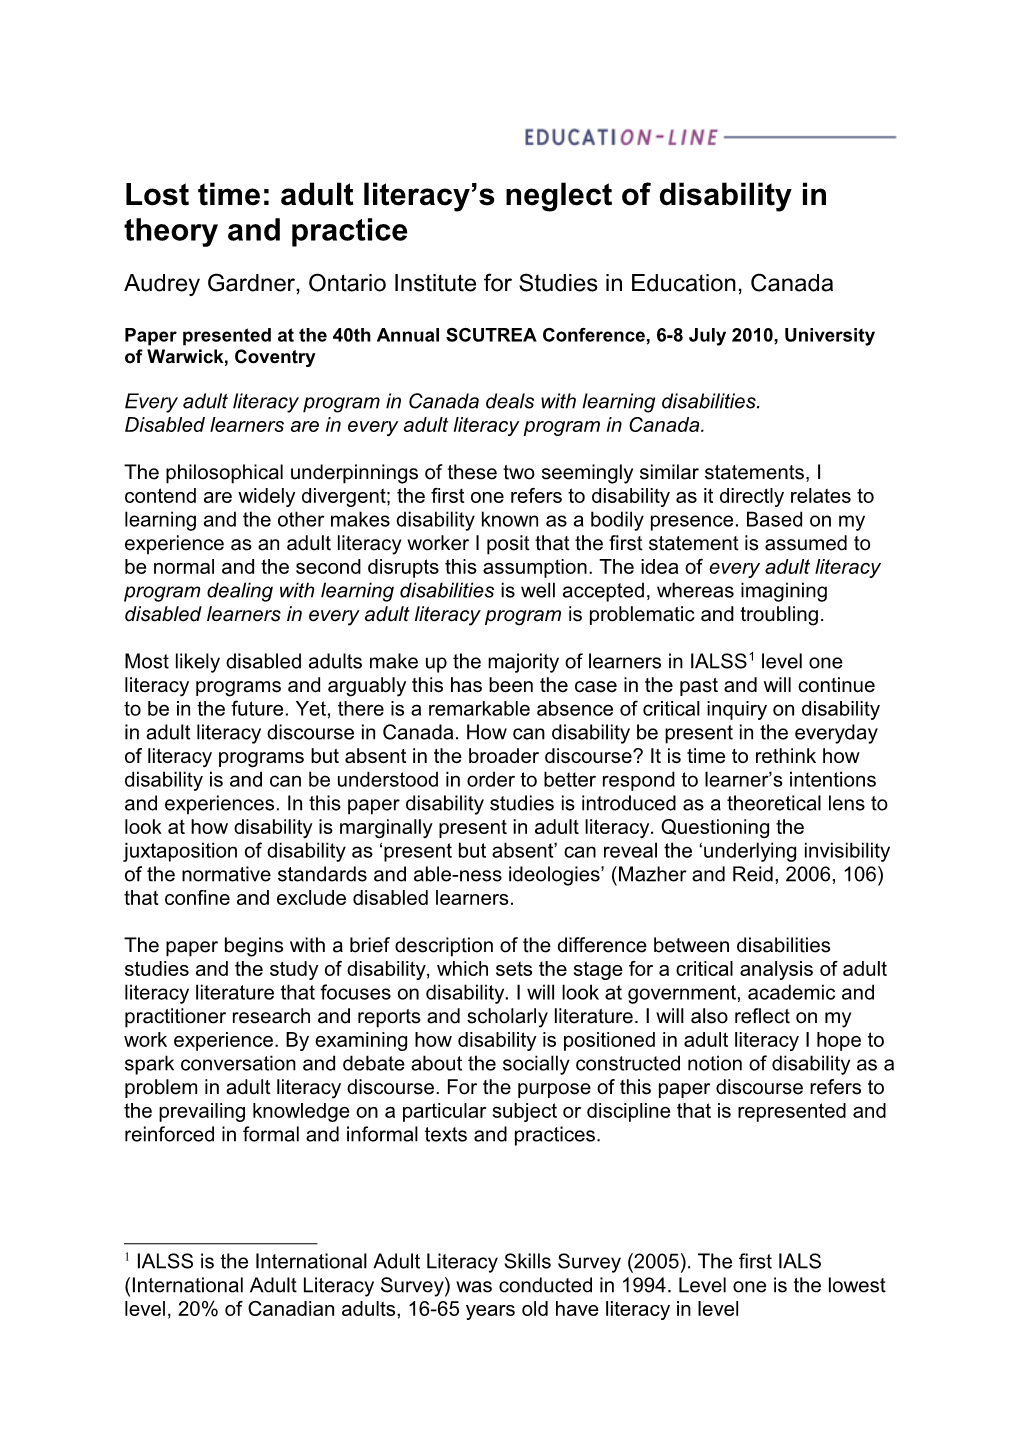 Lost Time:Adult Literacy S Neglect of Disability in Theory and Practice